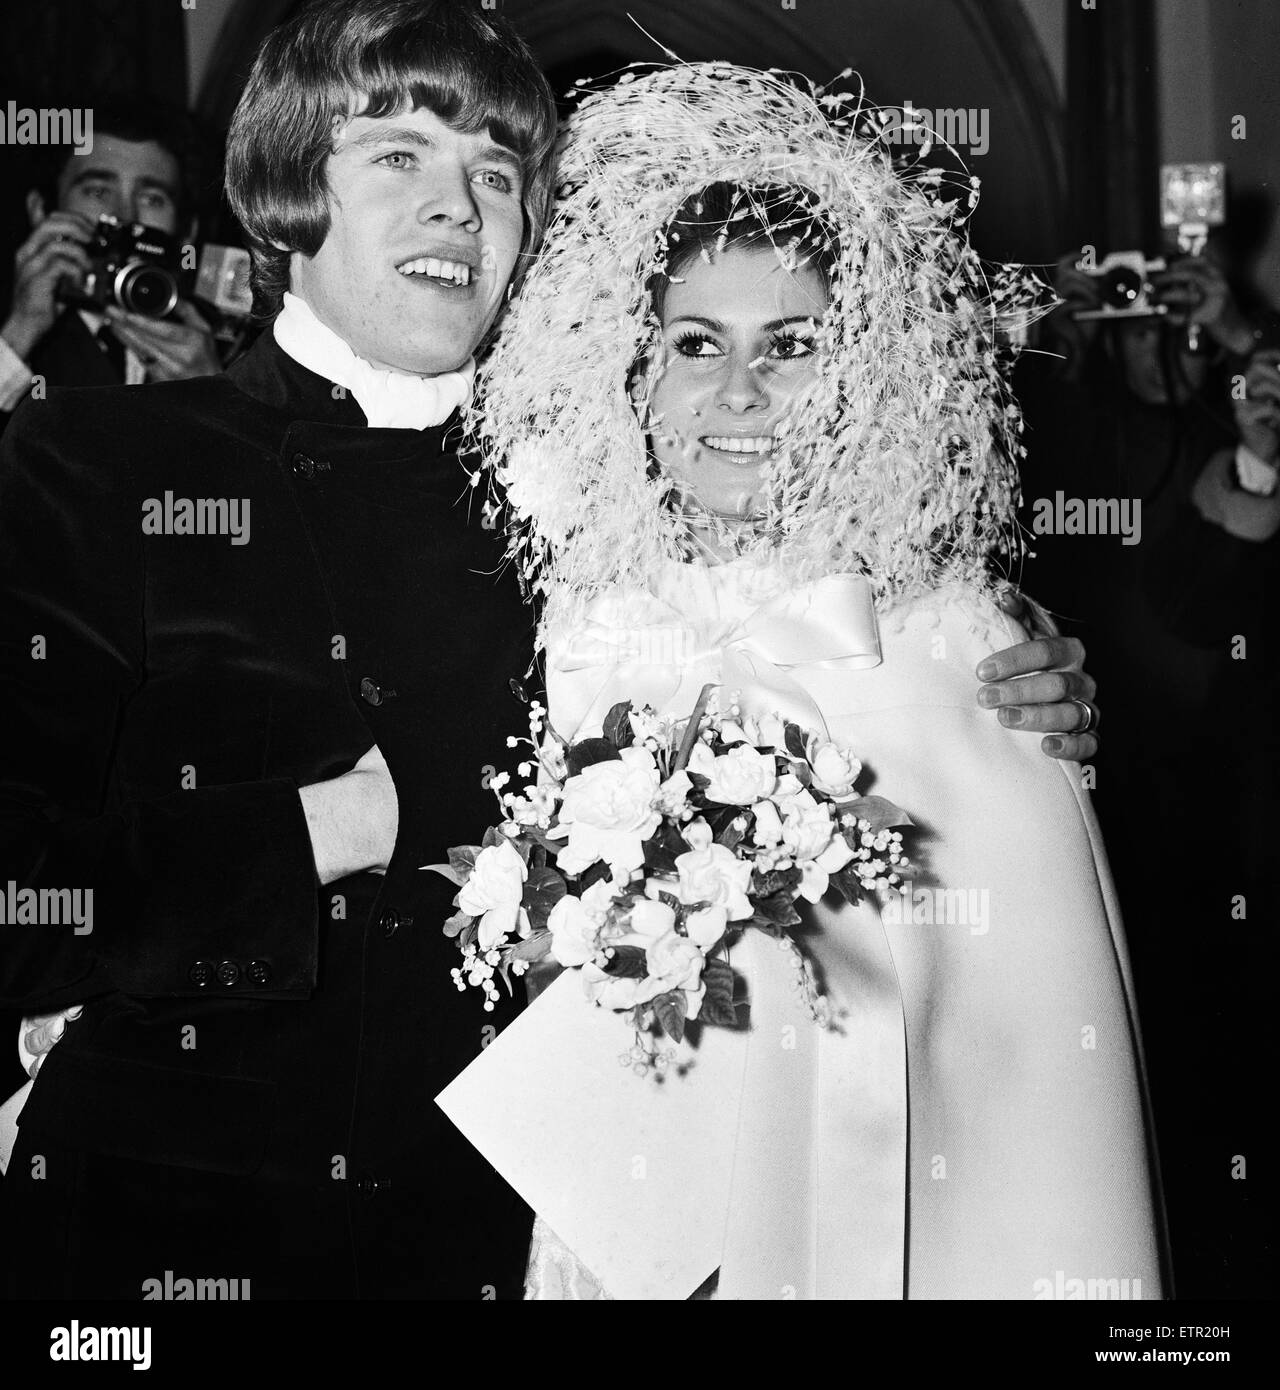 Peter Noone, lead singer of the British pop group Hermans Hermits with his bride Mirielle Strasser during yheir wedding ceremony at the Church of the Immaculate Conception in Farm Street, Mayfair. 5th November 1968. Stock Photo